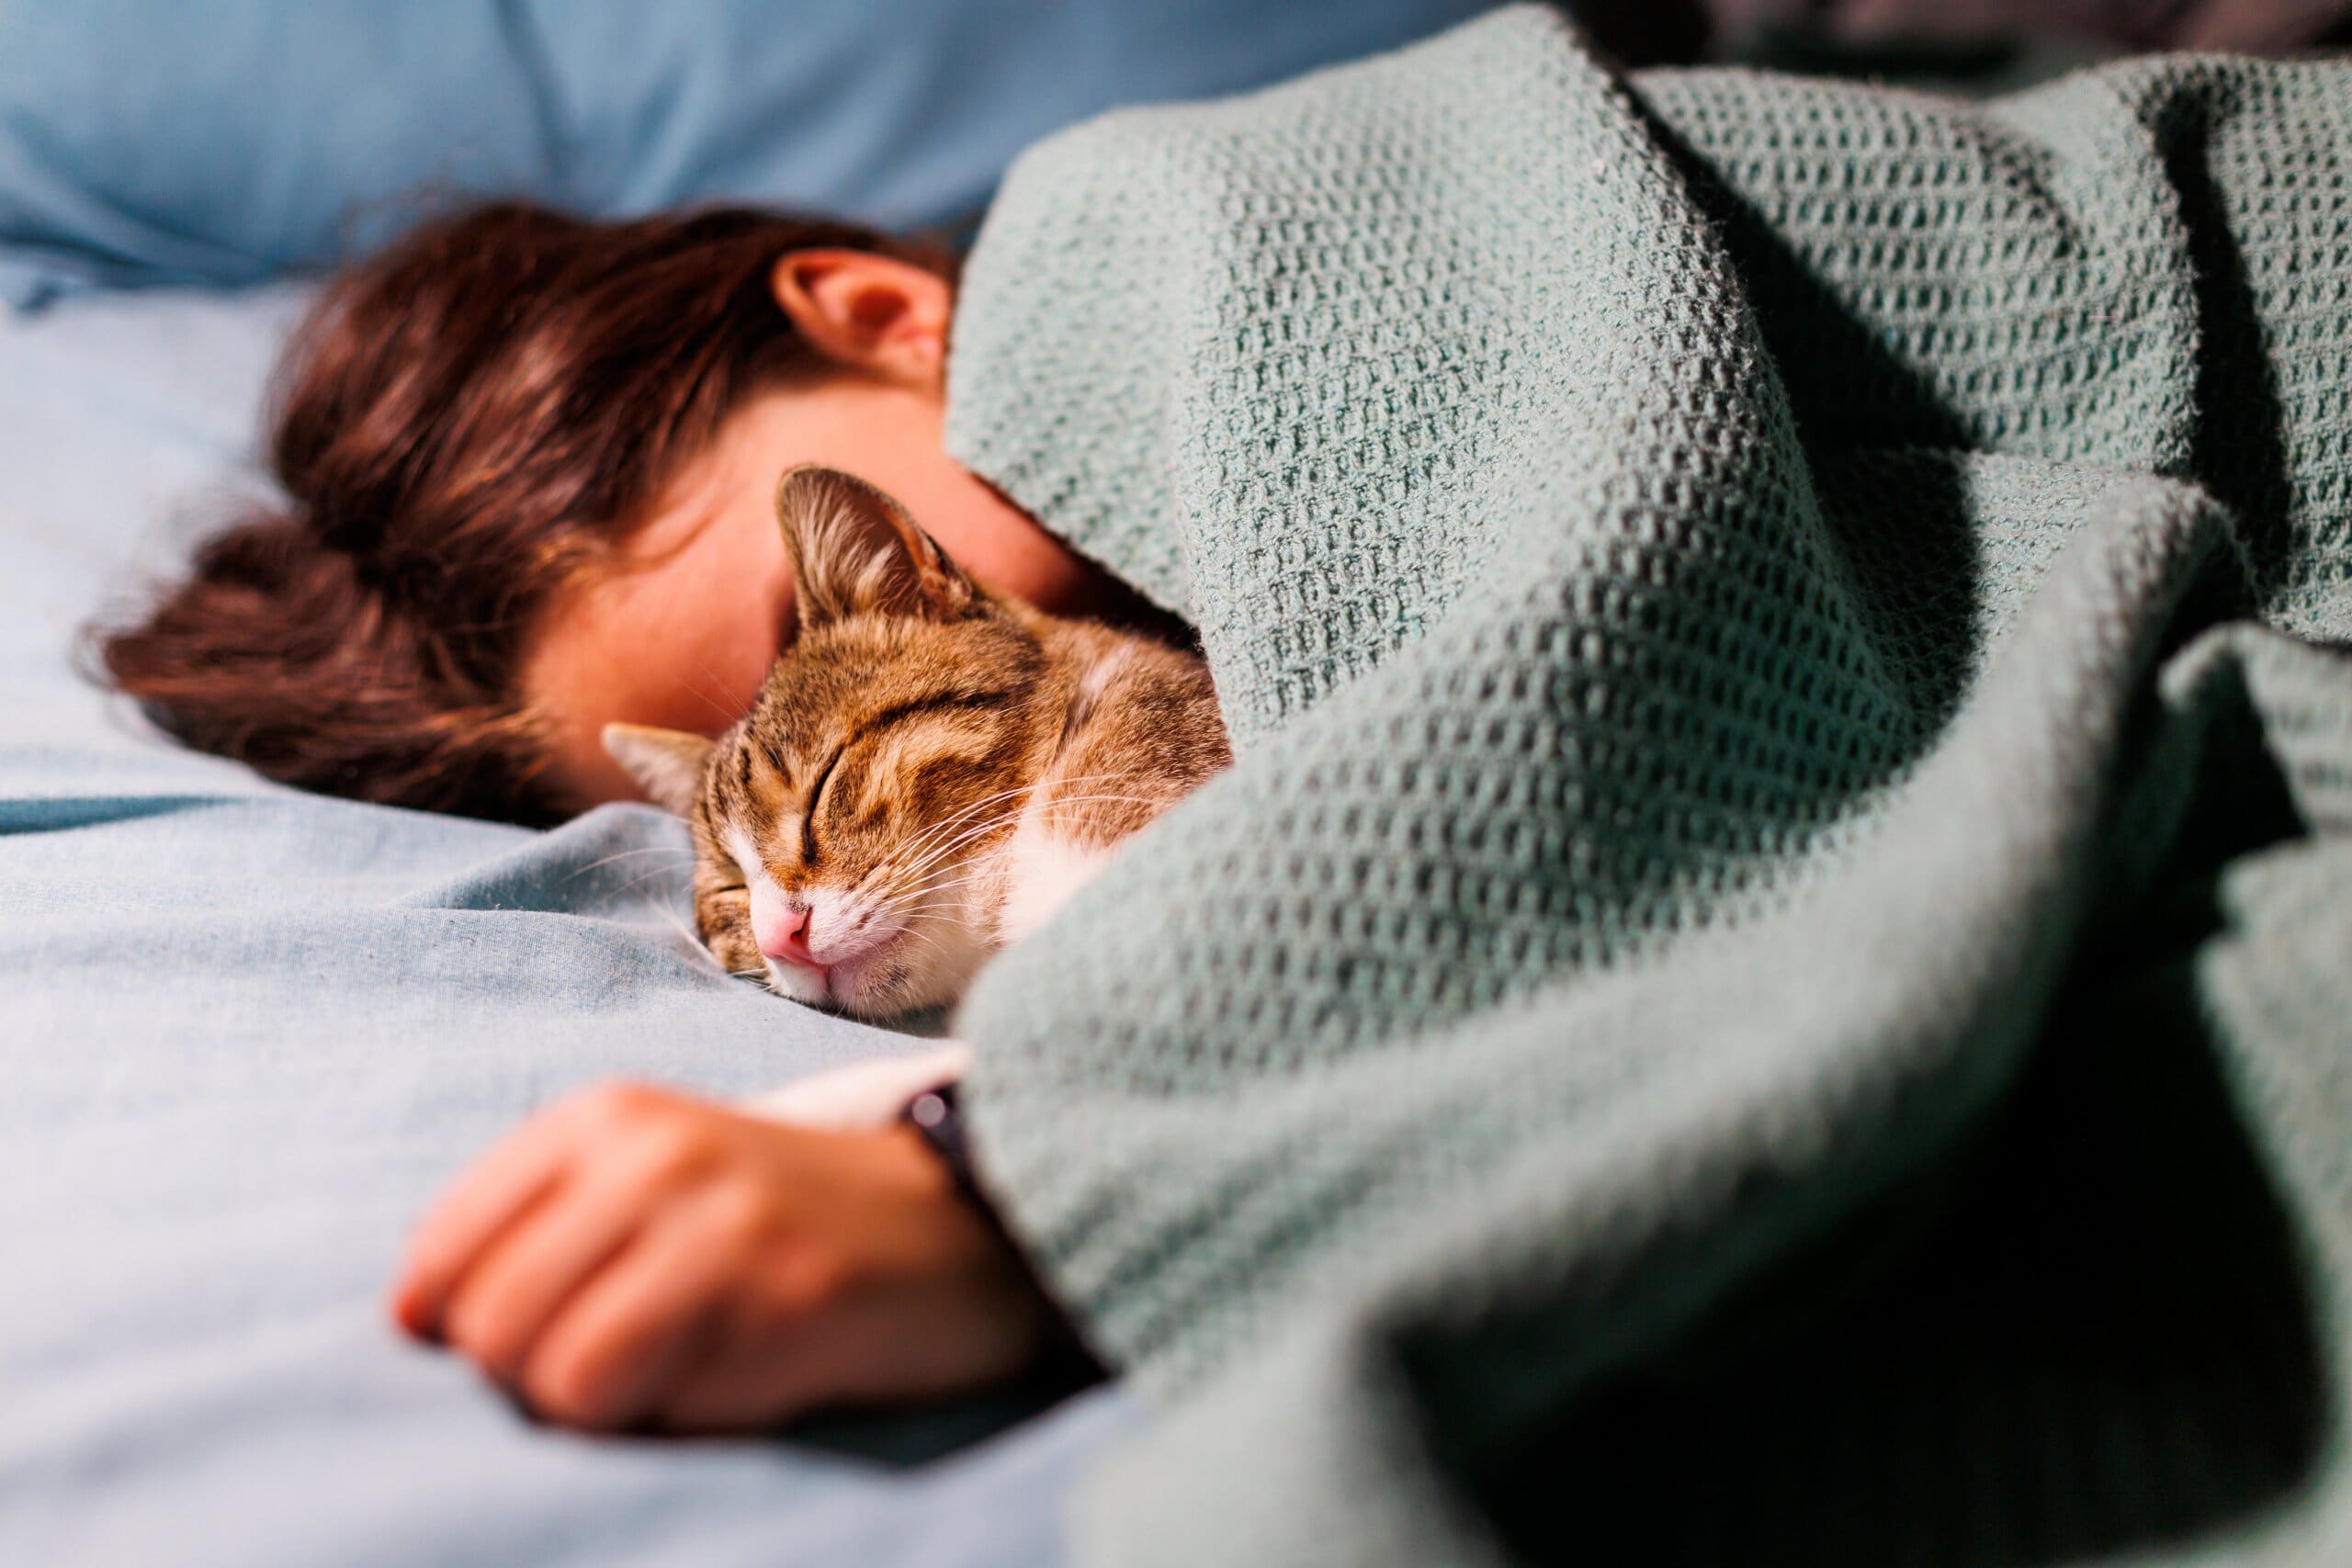 Child and cat sleeping under a blanket in bed. Cat is sleeping in bed with boy.